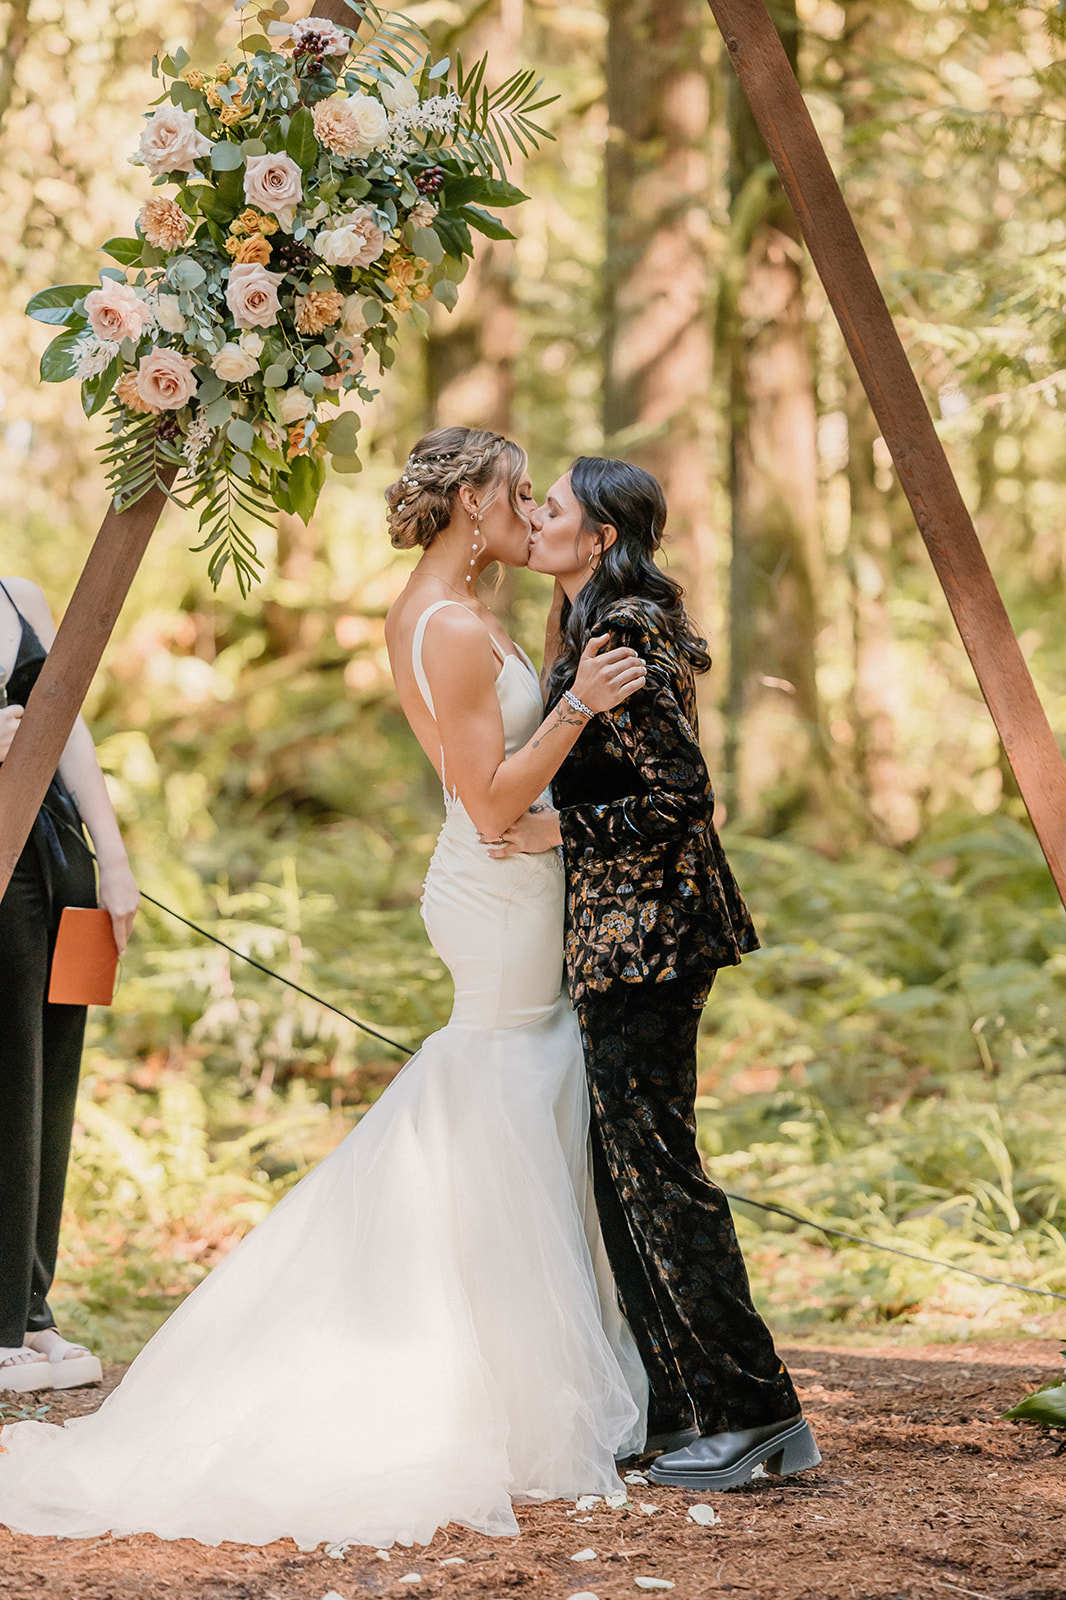 married couple sharing their first kiss in the forest during their ceremony